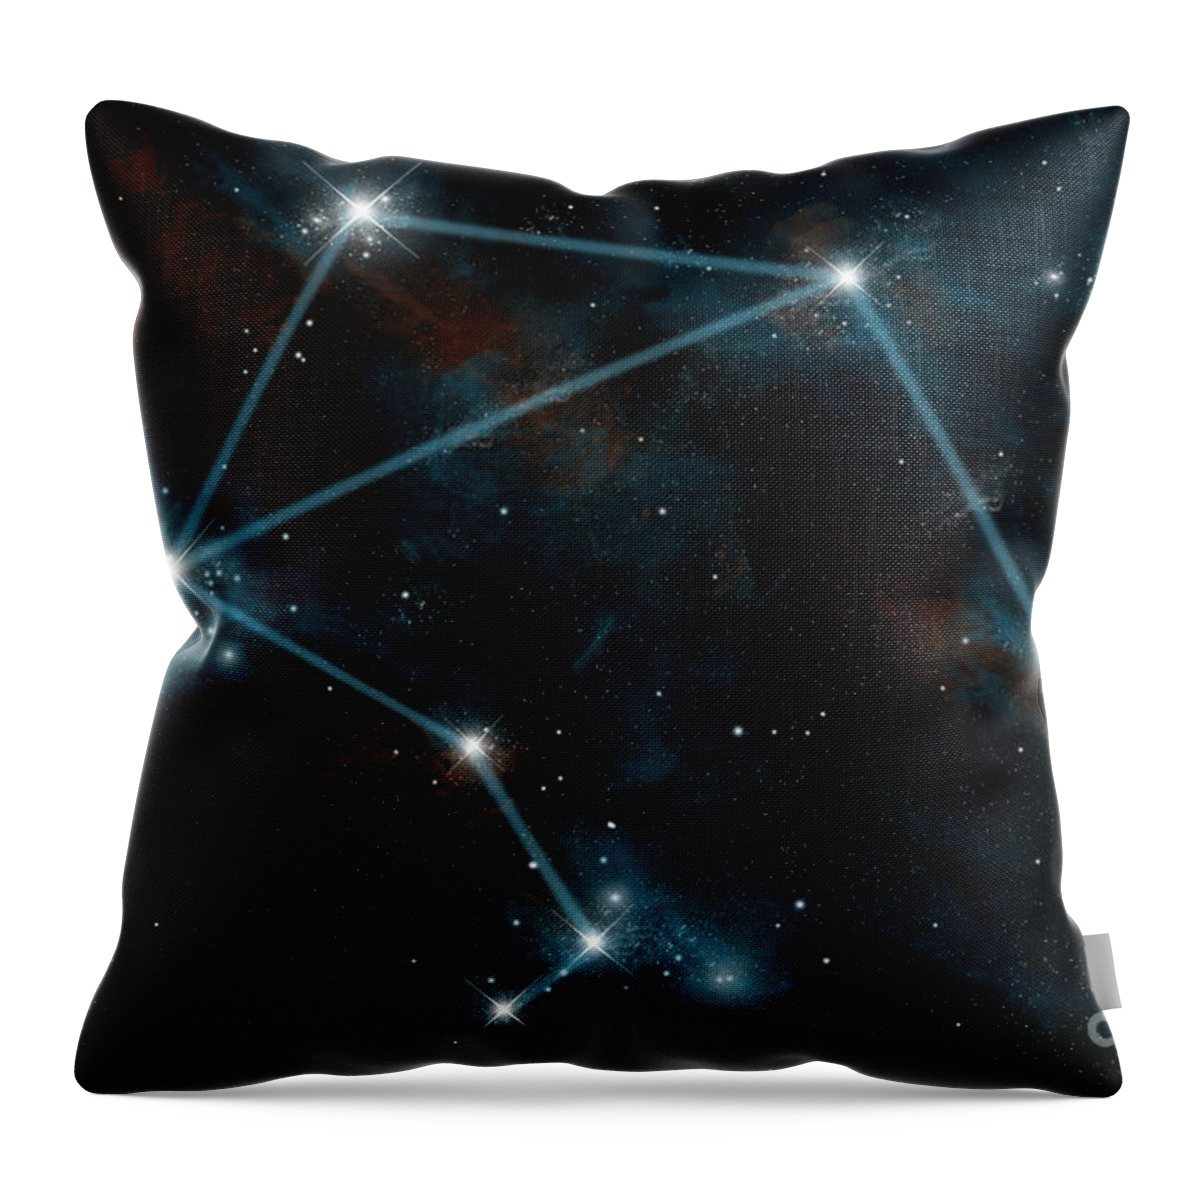 Astrology Throw Pillow featuring the photograph Constellation Of Libra The Scales by Marc Ward